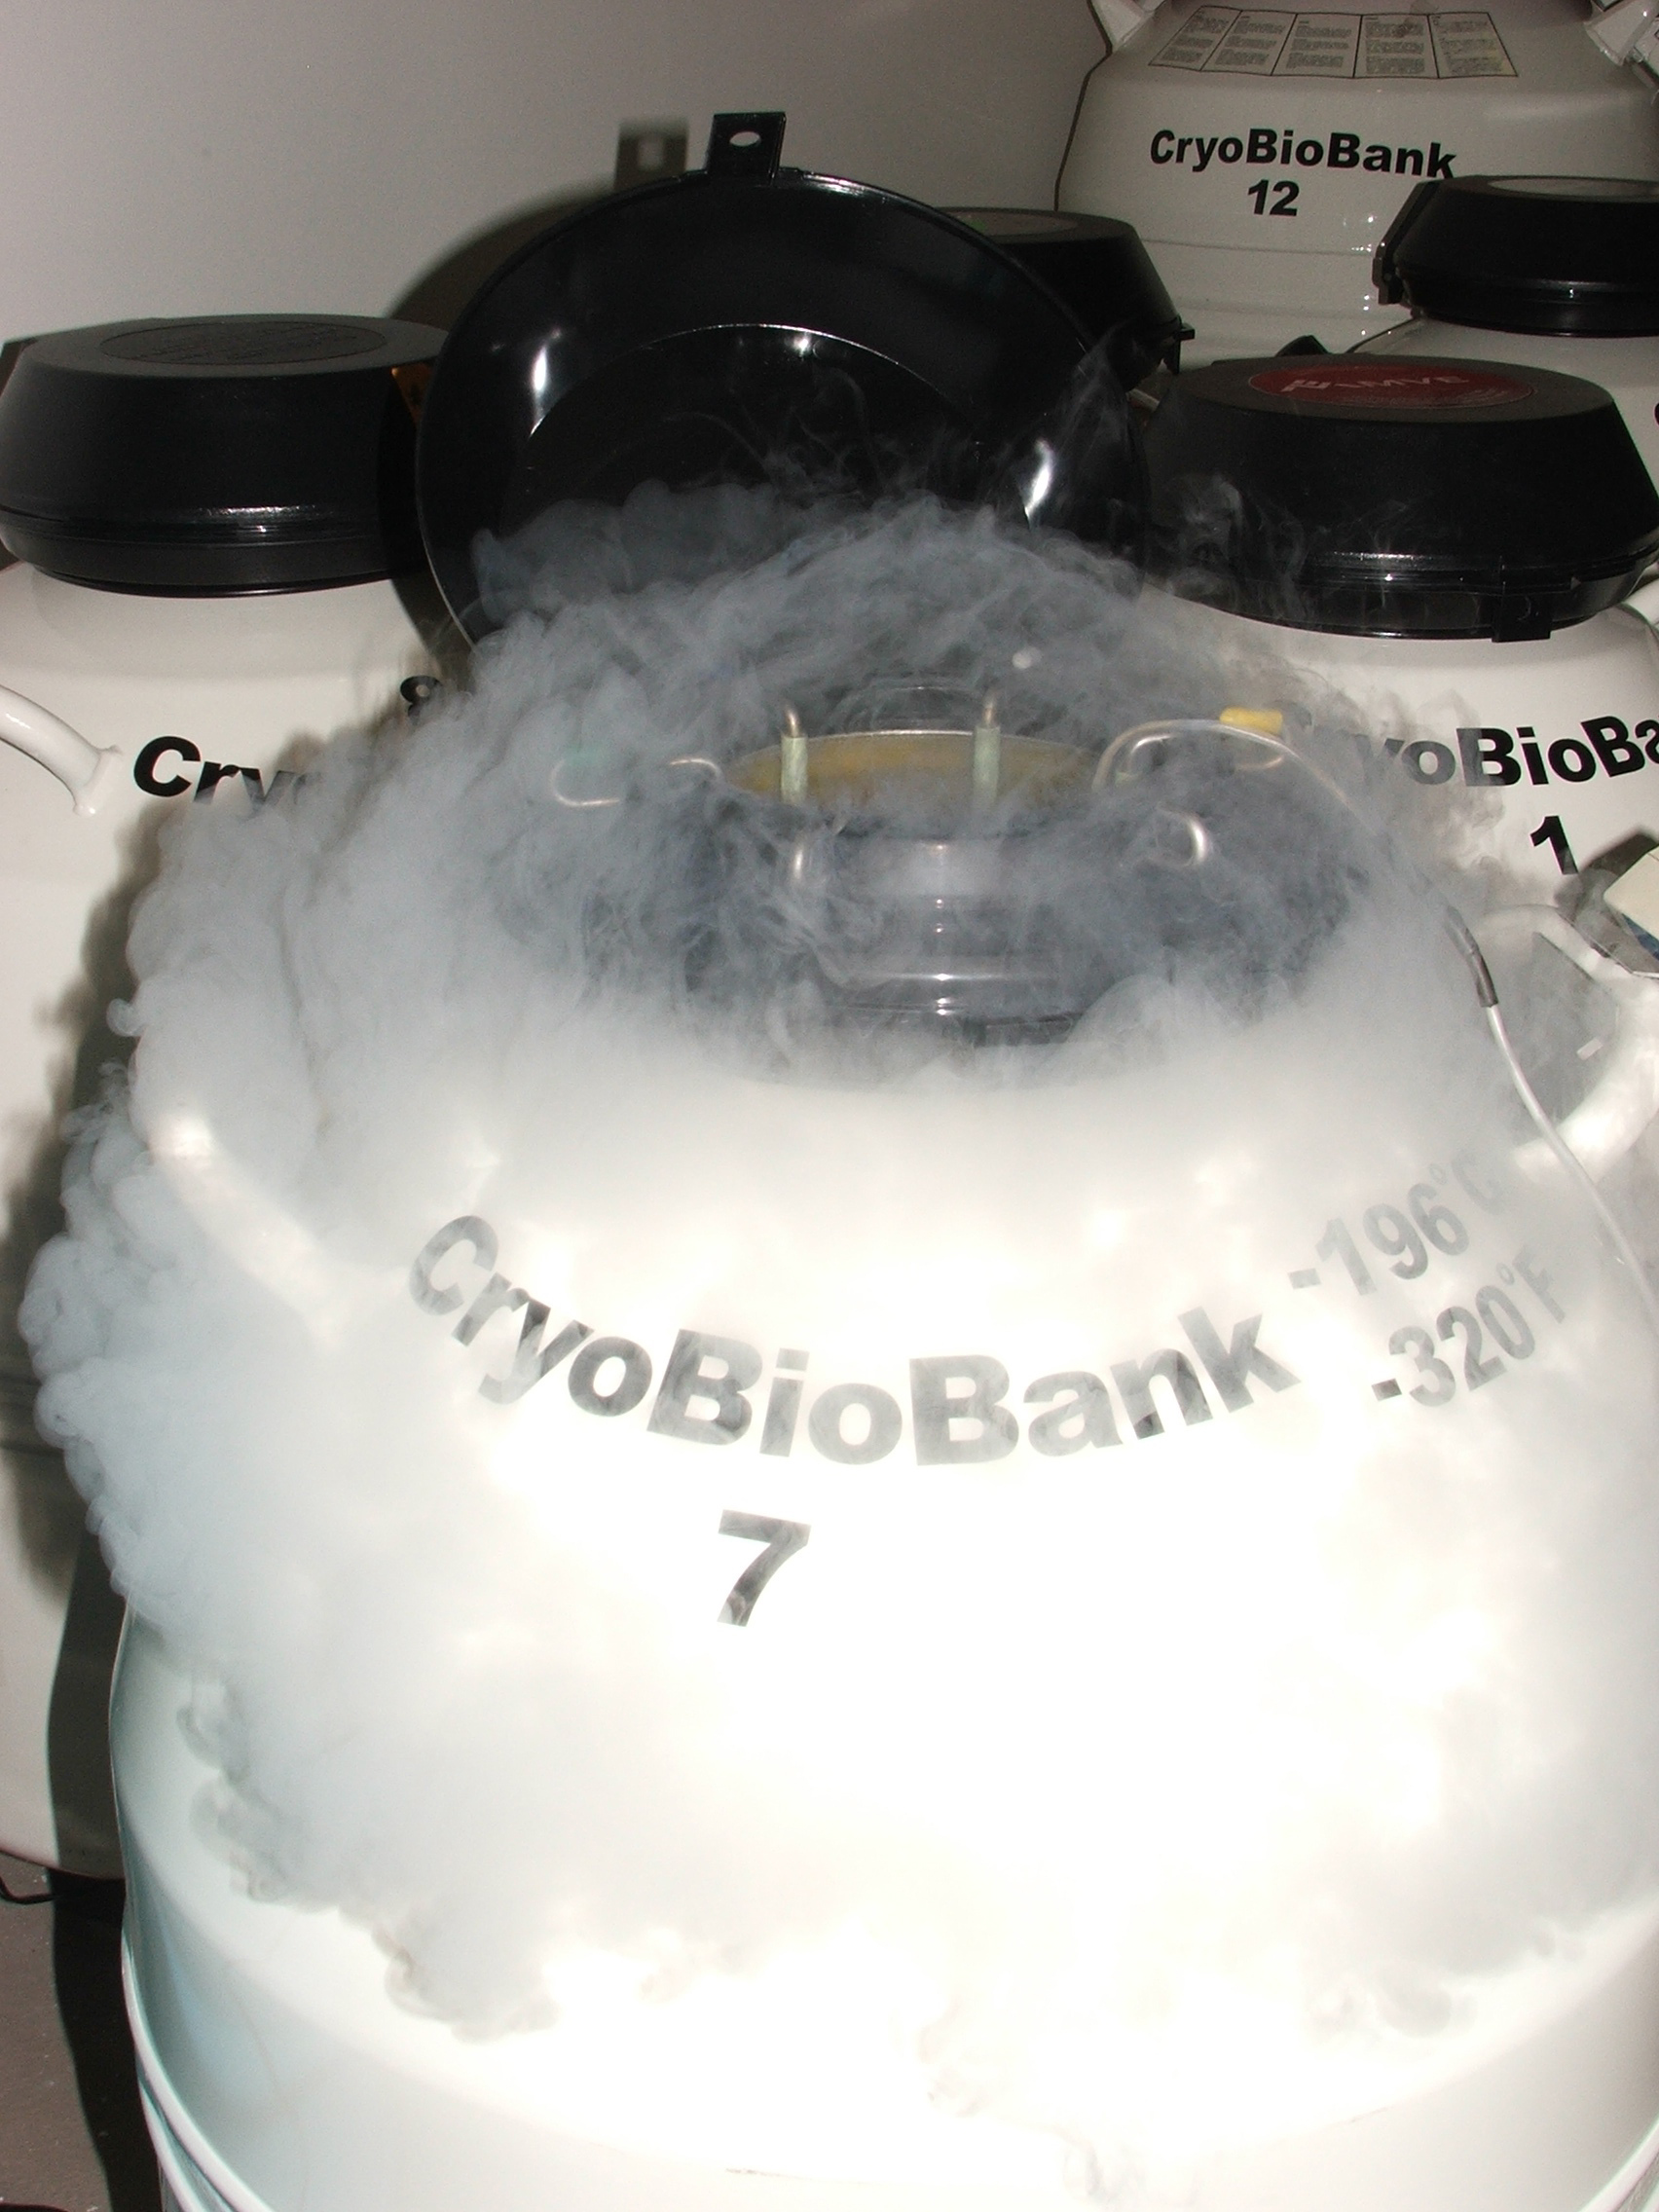 CREW’s CryoBioBank, where samples, such as those from Hawaii, will be stored.